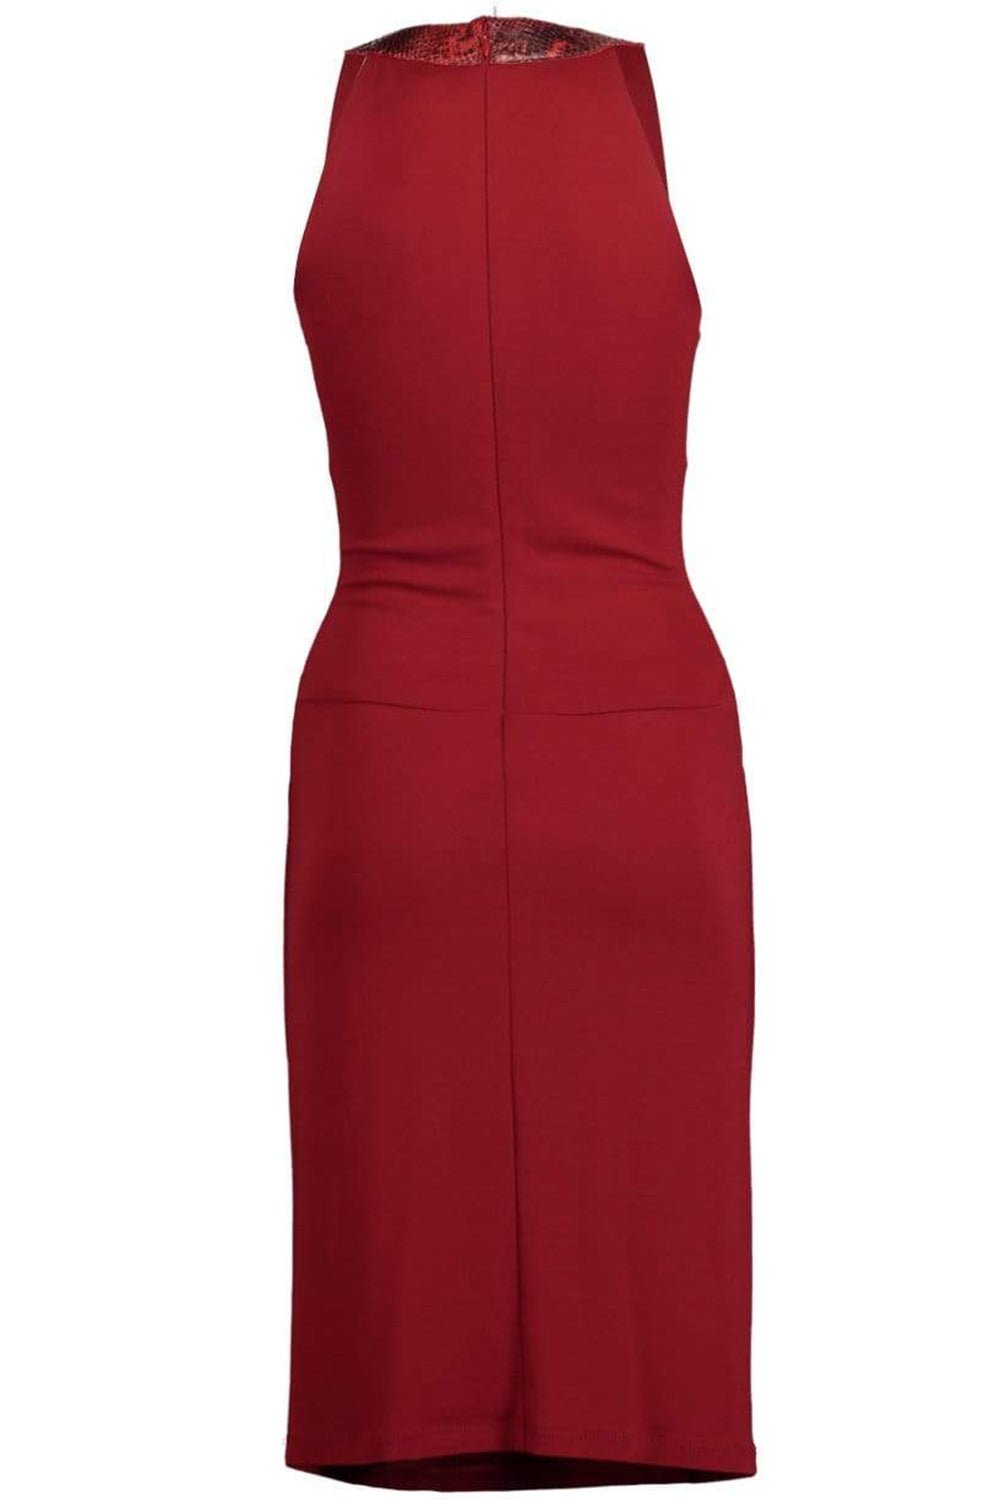 MICHAEL KORS-Halter Dress with Faux Python-RED